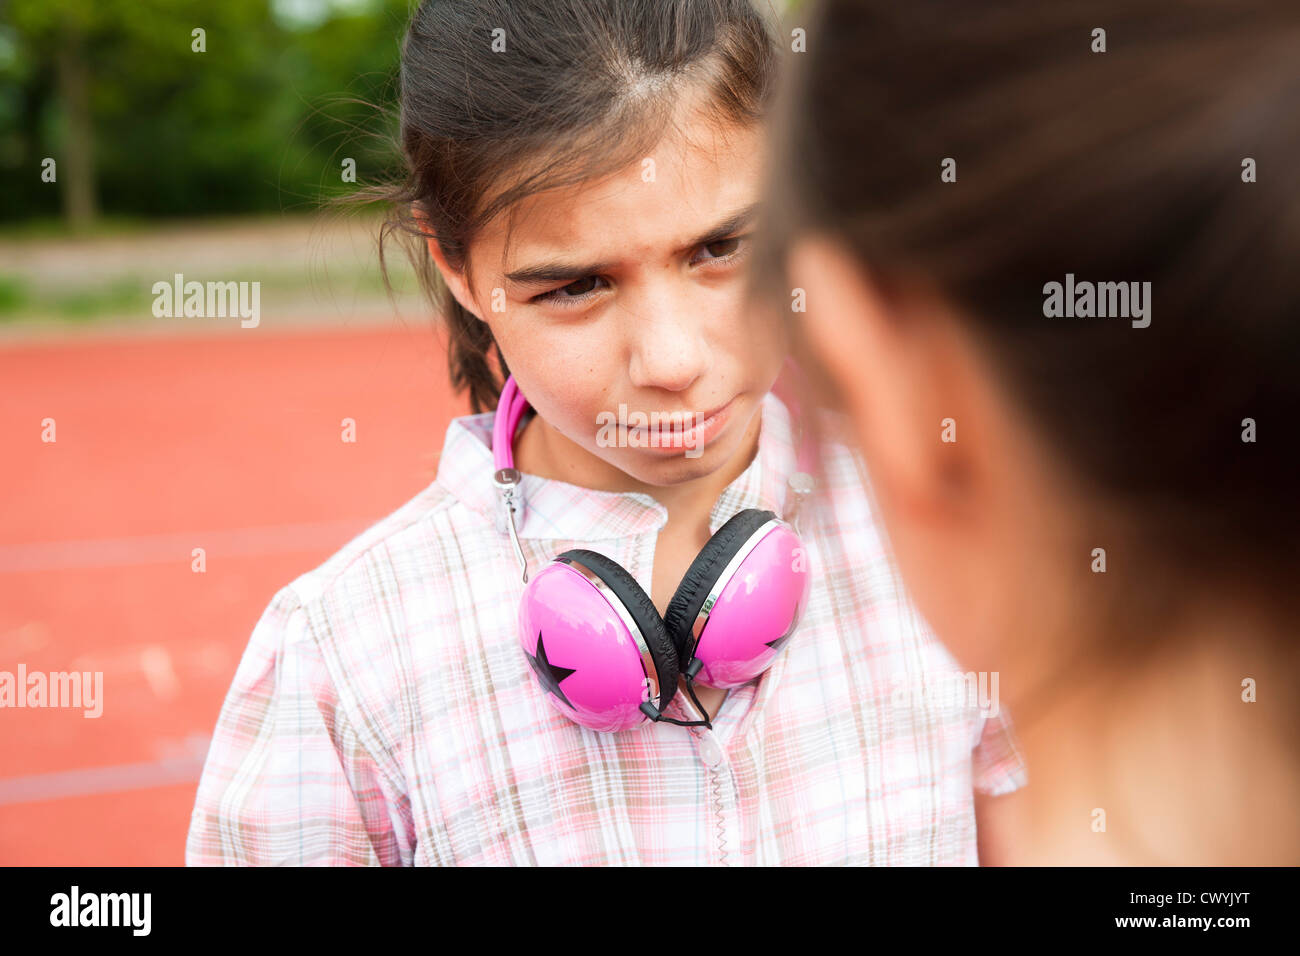 Girl looking seriously at another girl Stock Photo